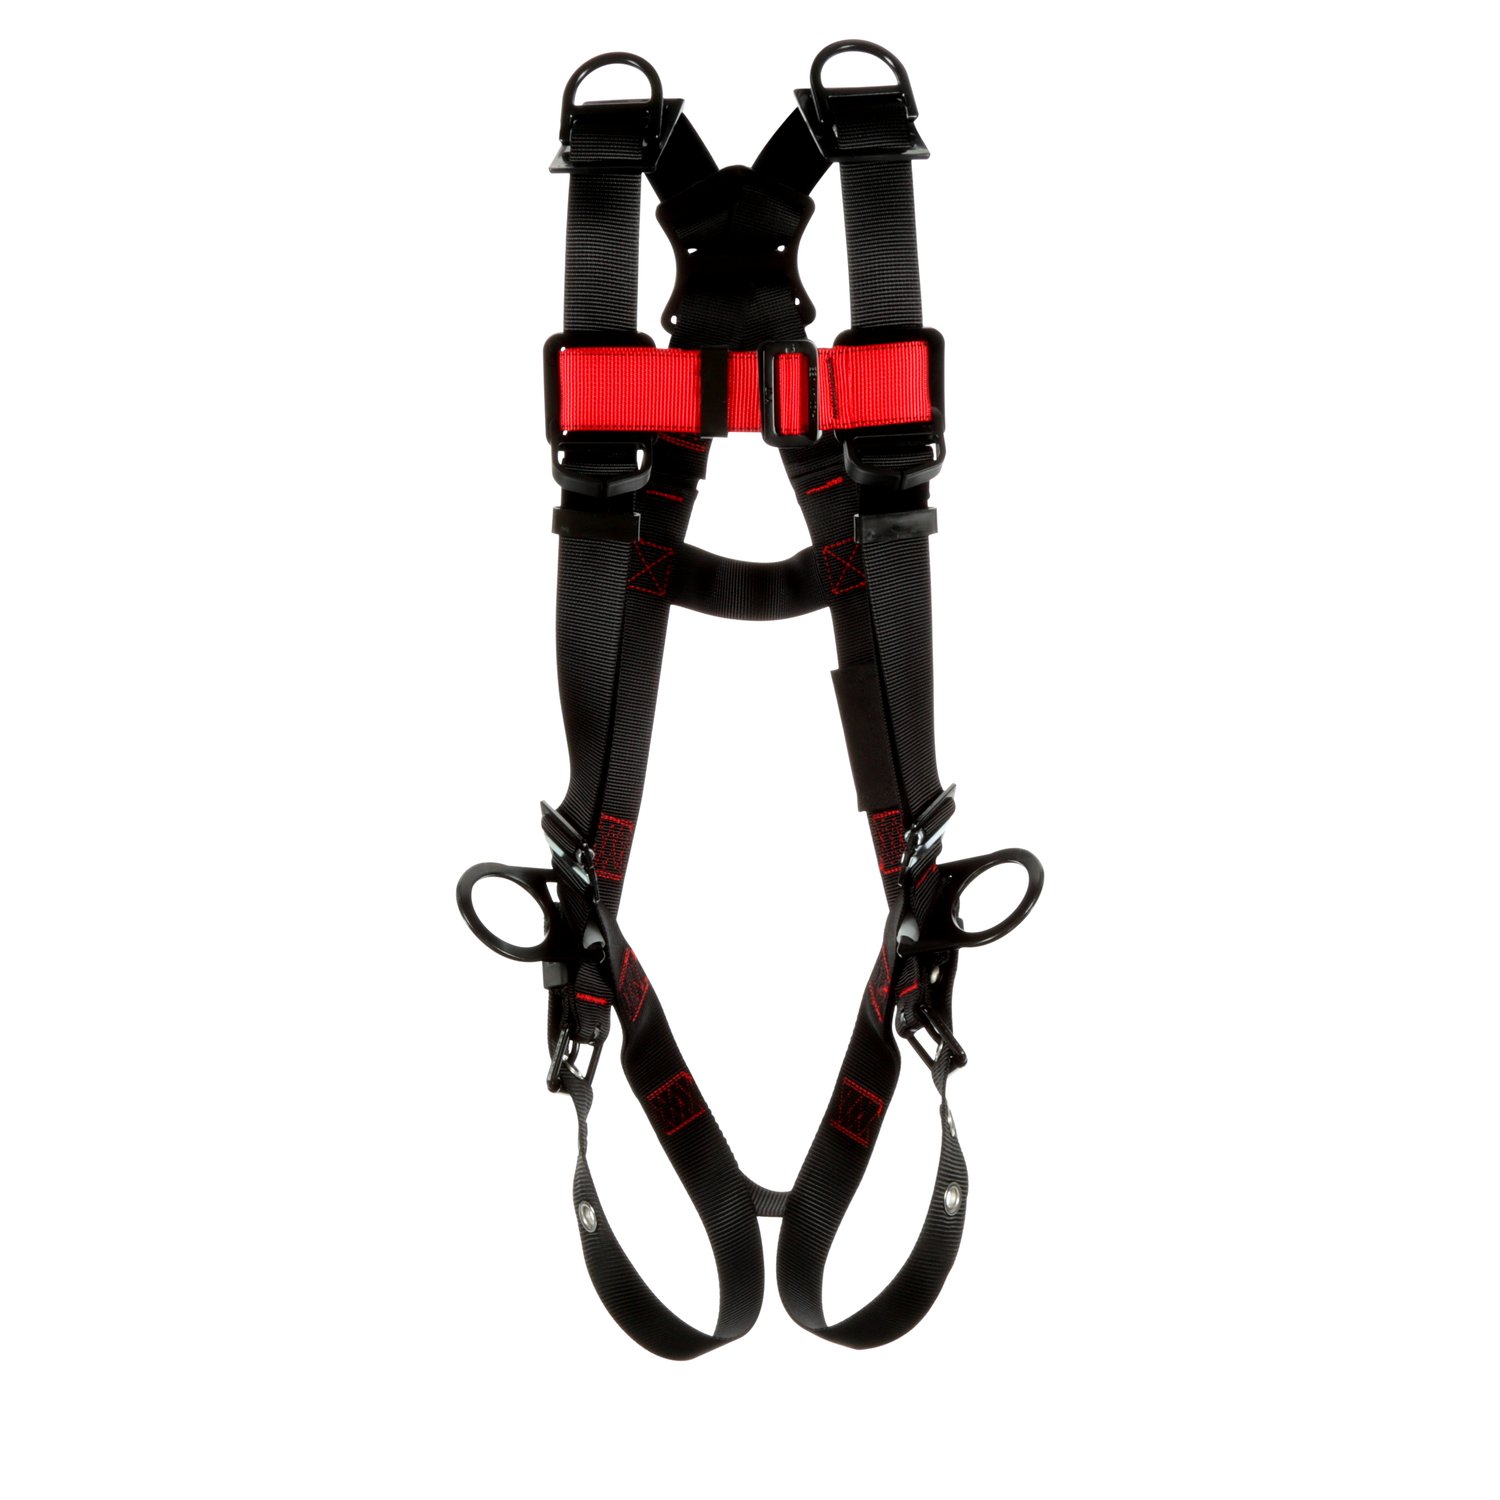 7012816791 - 3M Protecta P200 Vest Positioning/Retrieval Safety Harness 1161538, Small